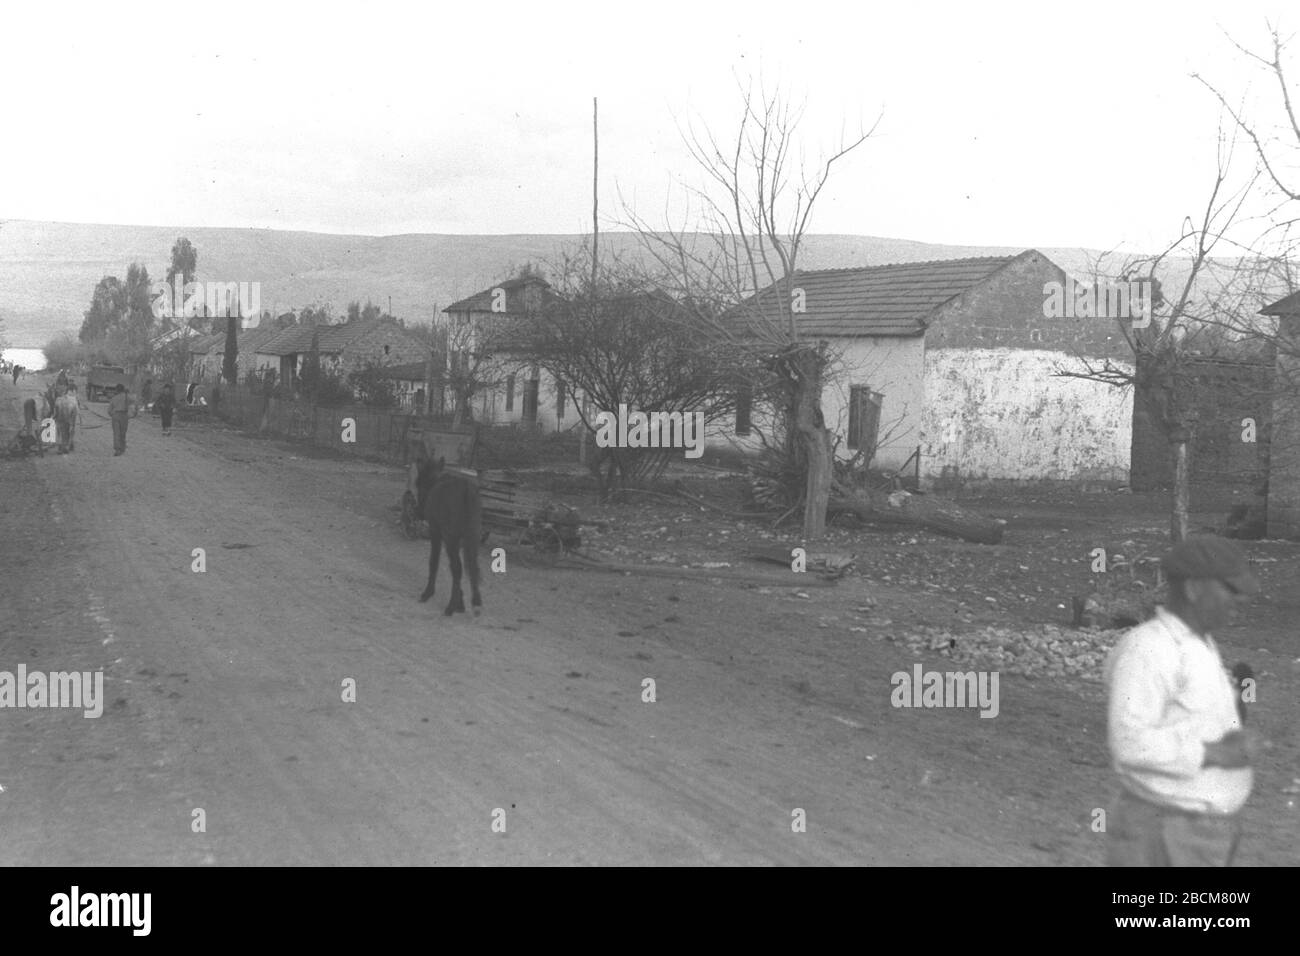 English The Village Street In Yssod Hamaala On The Shore Of The Hula Lake I O O I I I U U I 3 March 1937 This Is Available From National Photo Collection Of Israel Photography Dept Goverment